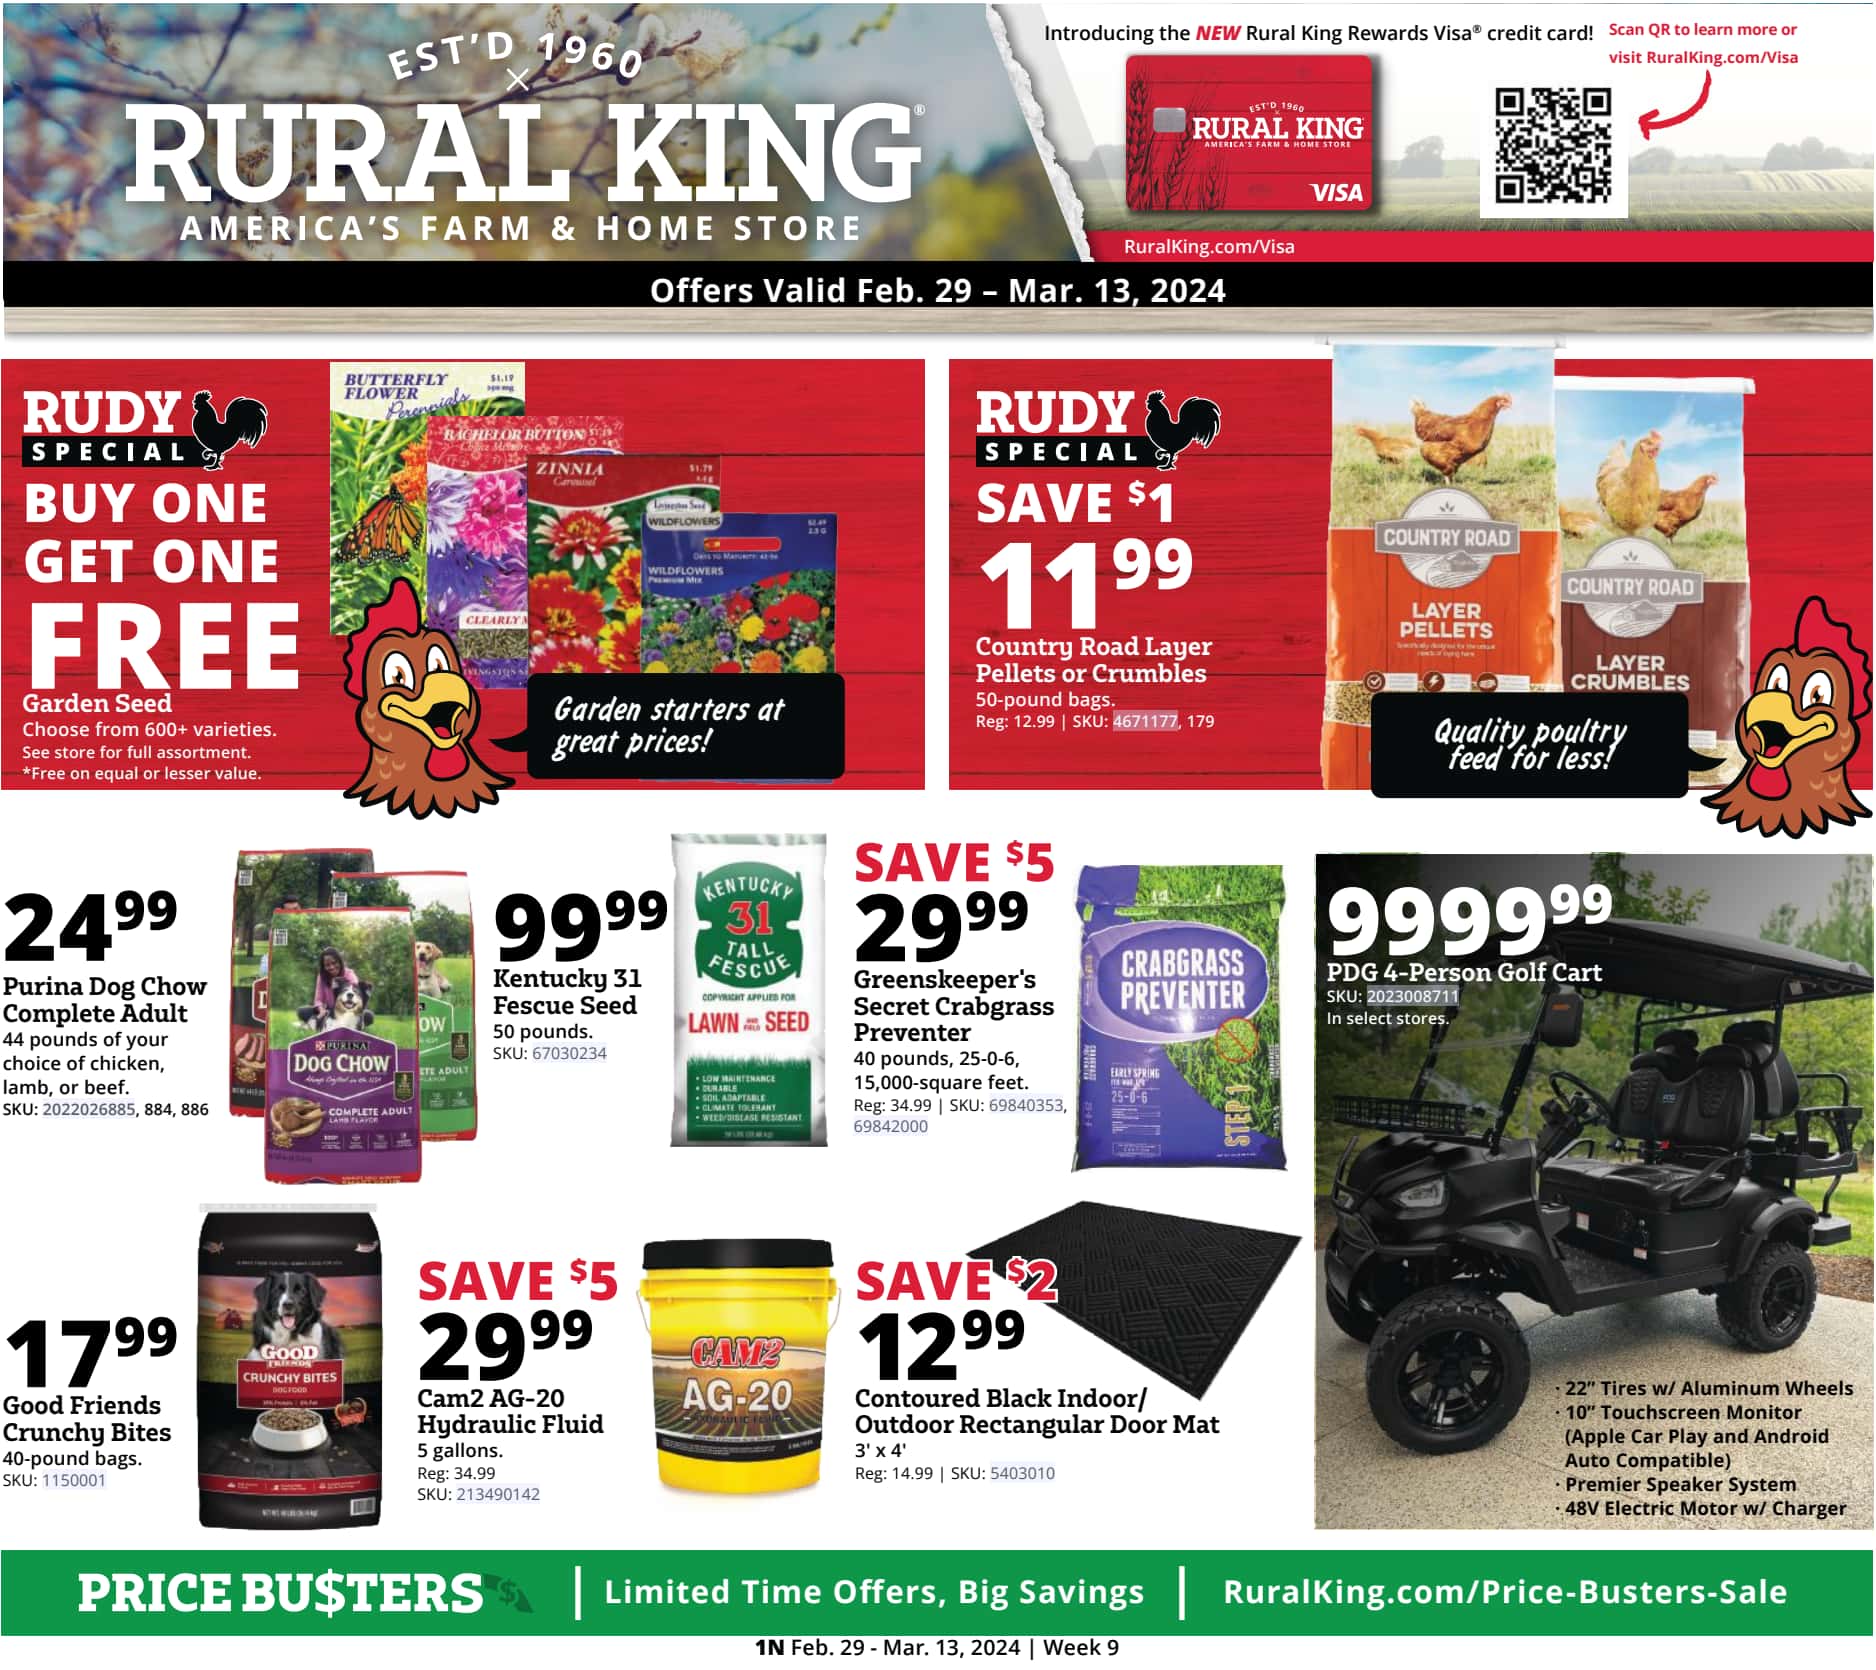 Rural King ad for this week Preview for March 28 - April 10, 2024